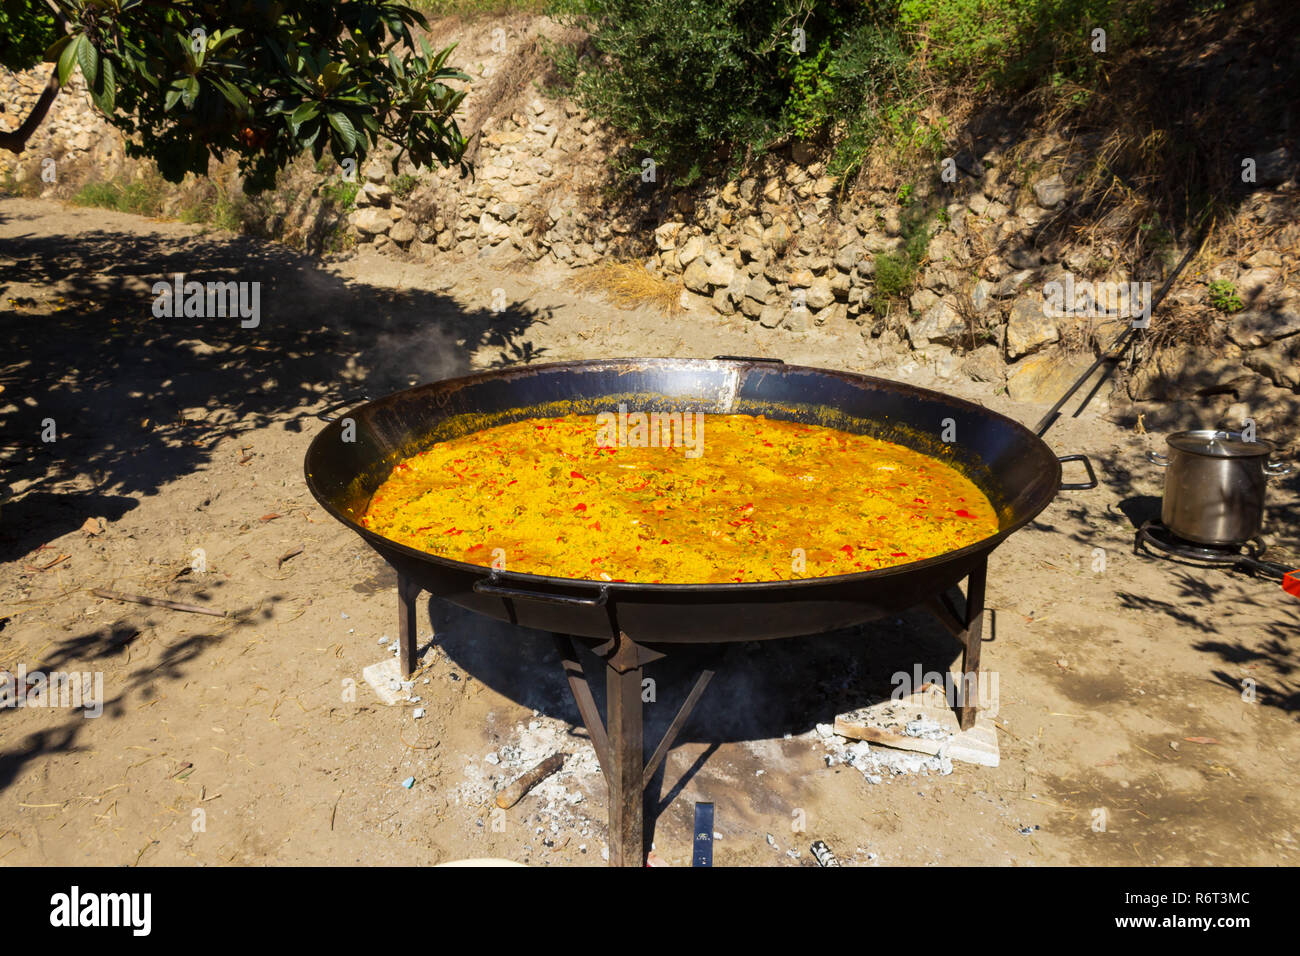 Paella being cooked on an Open Fire at a Village Fiesta in the  Almanzora Valley, Almeria province, Andalucía, Spain Stock Photo